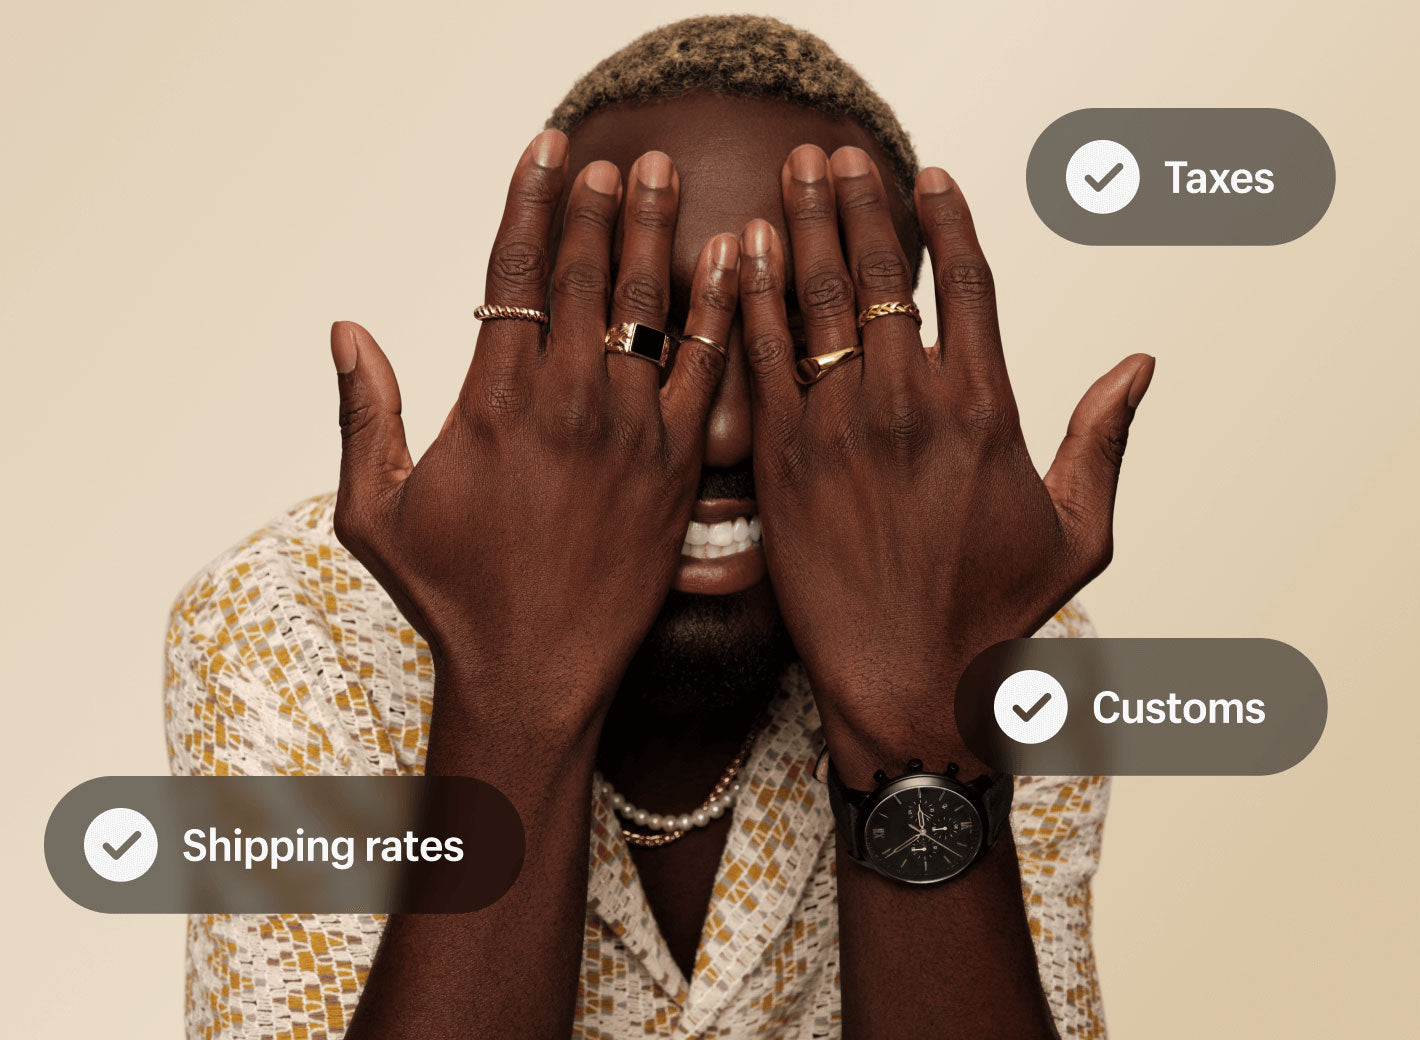 A merchant wearing a watch, multiple rings and two necklaces playfully hides their face behind their hands. A glimpse of their smile is visible behind their hands. Three superimposed graphics show the text Shipping rates, Taxes, and Customs with checkmarks next to them.